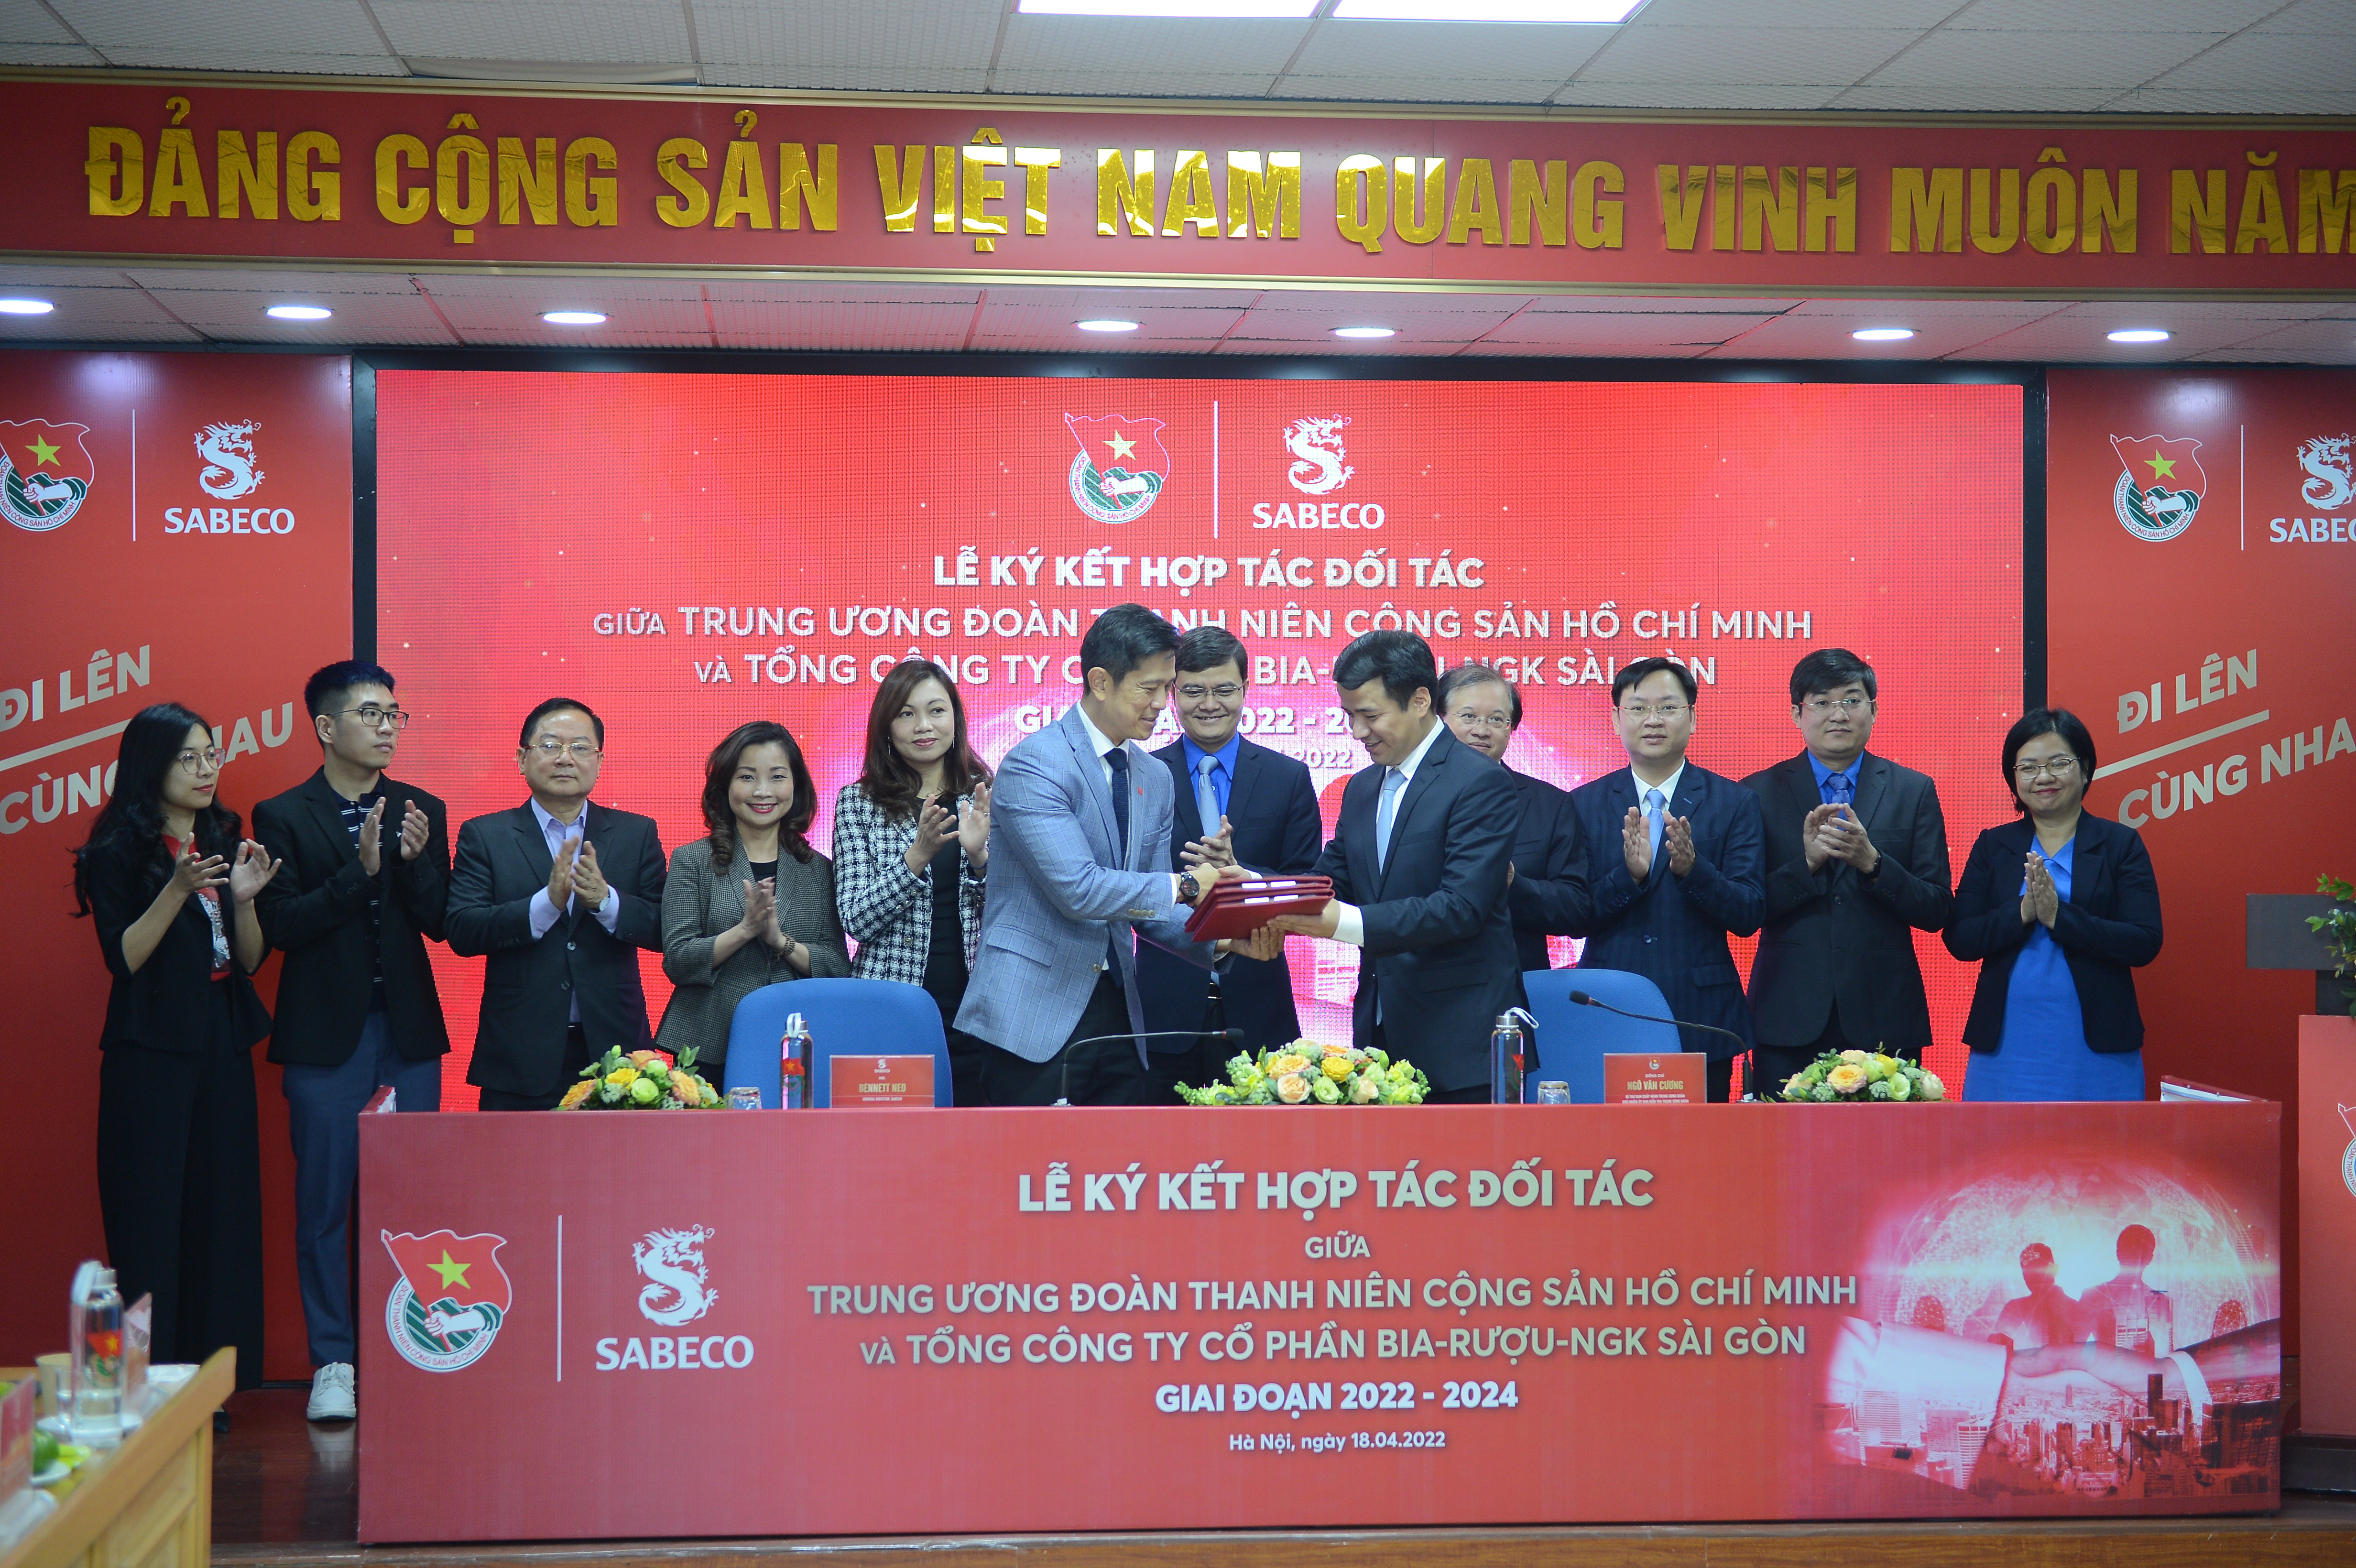 THE HO CHI MINH COMMUNIST YOUTH UNION AND SABECO SIGNED COOPERATION FOR 2022-2024